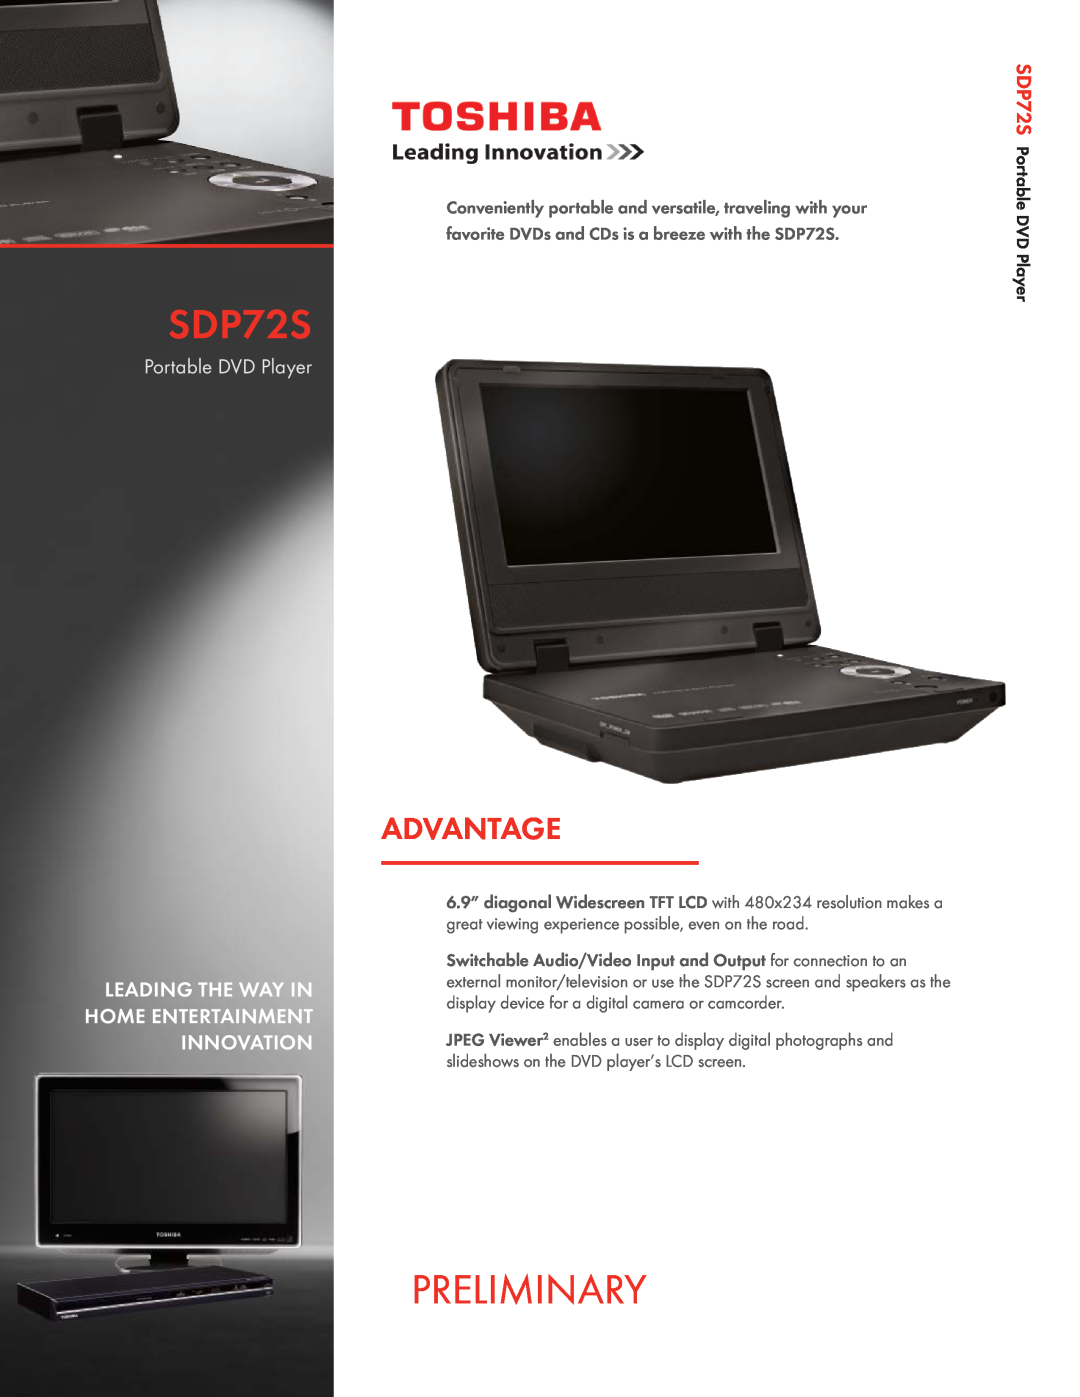 Toshiba SDP72S manual Preliminary, Advantage, Portable DVD Player, Leading The Way In Home Entertainment Innovation 